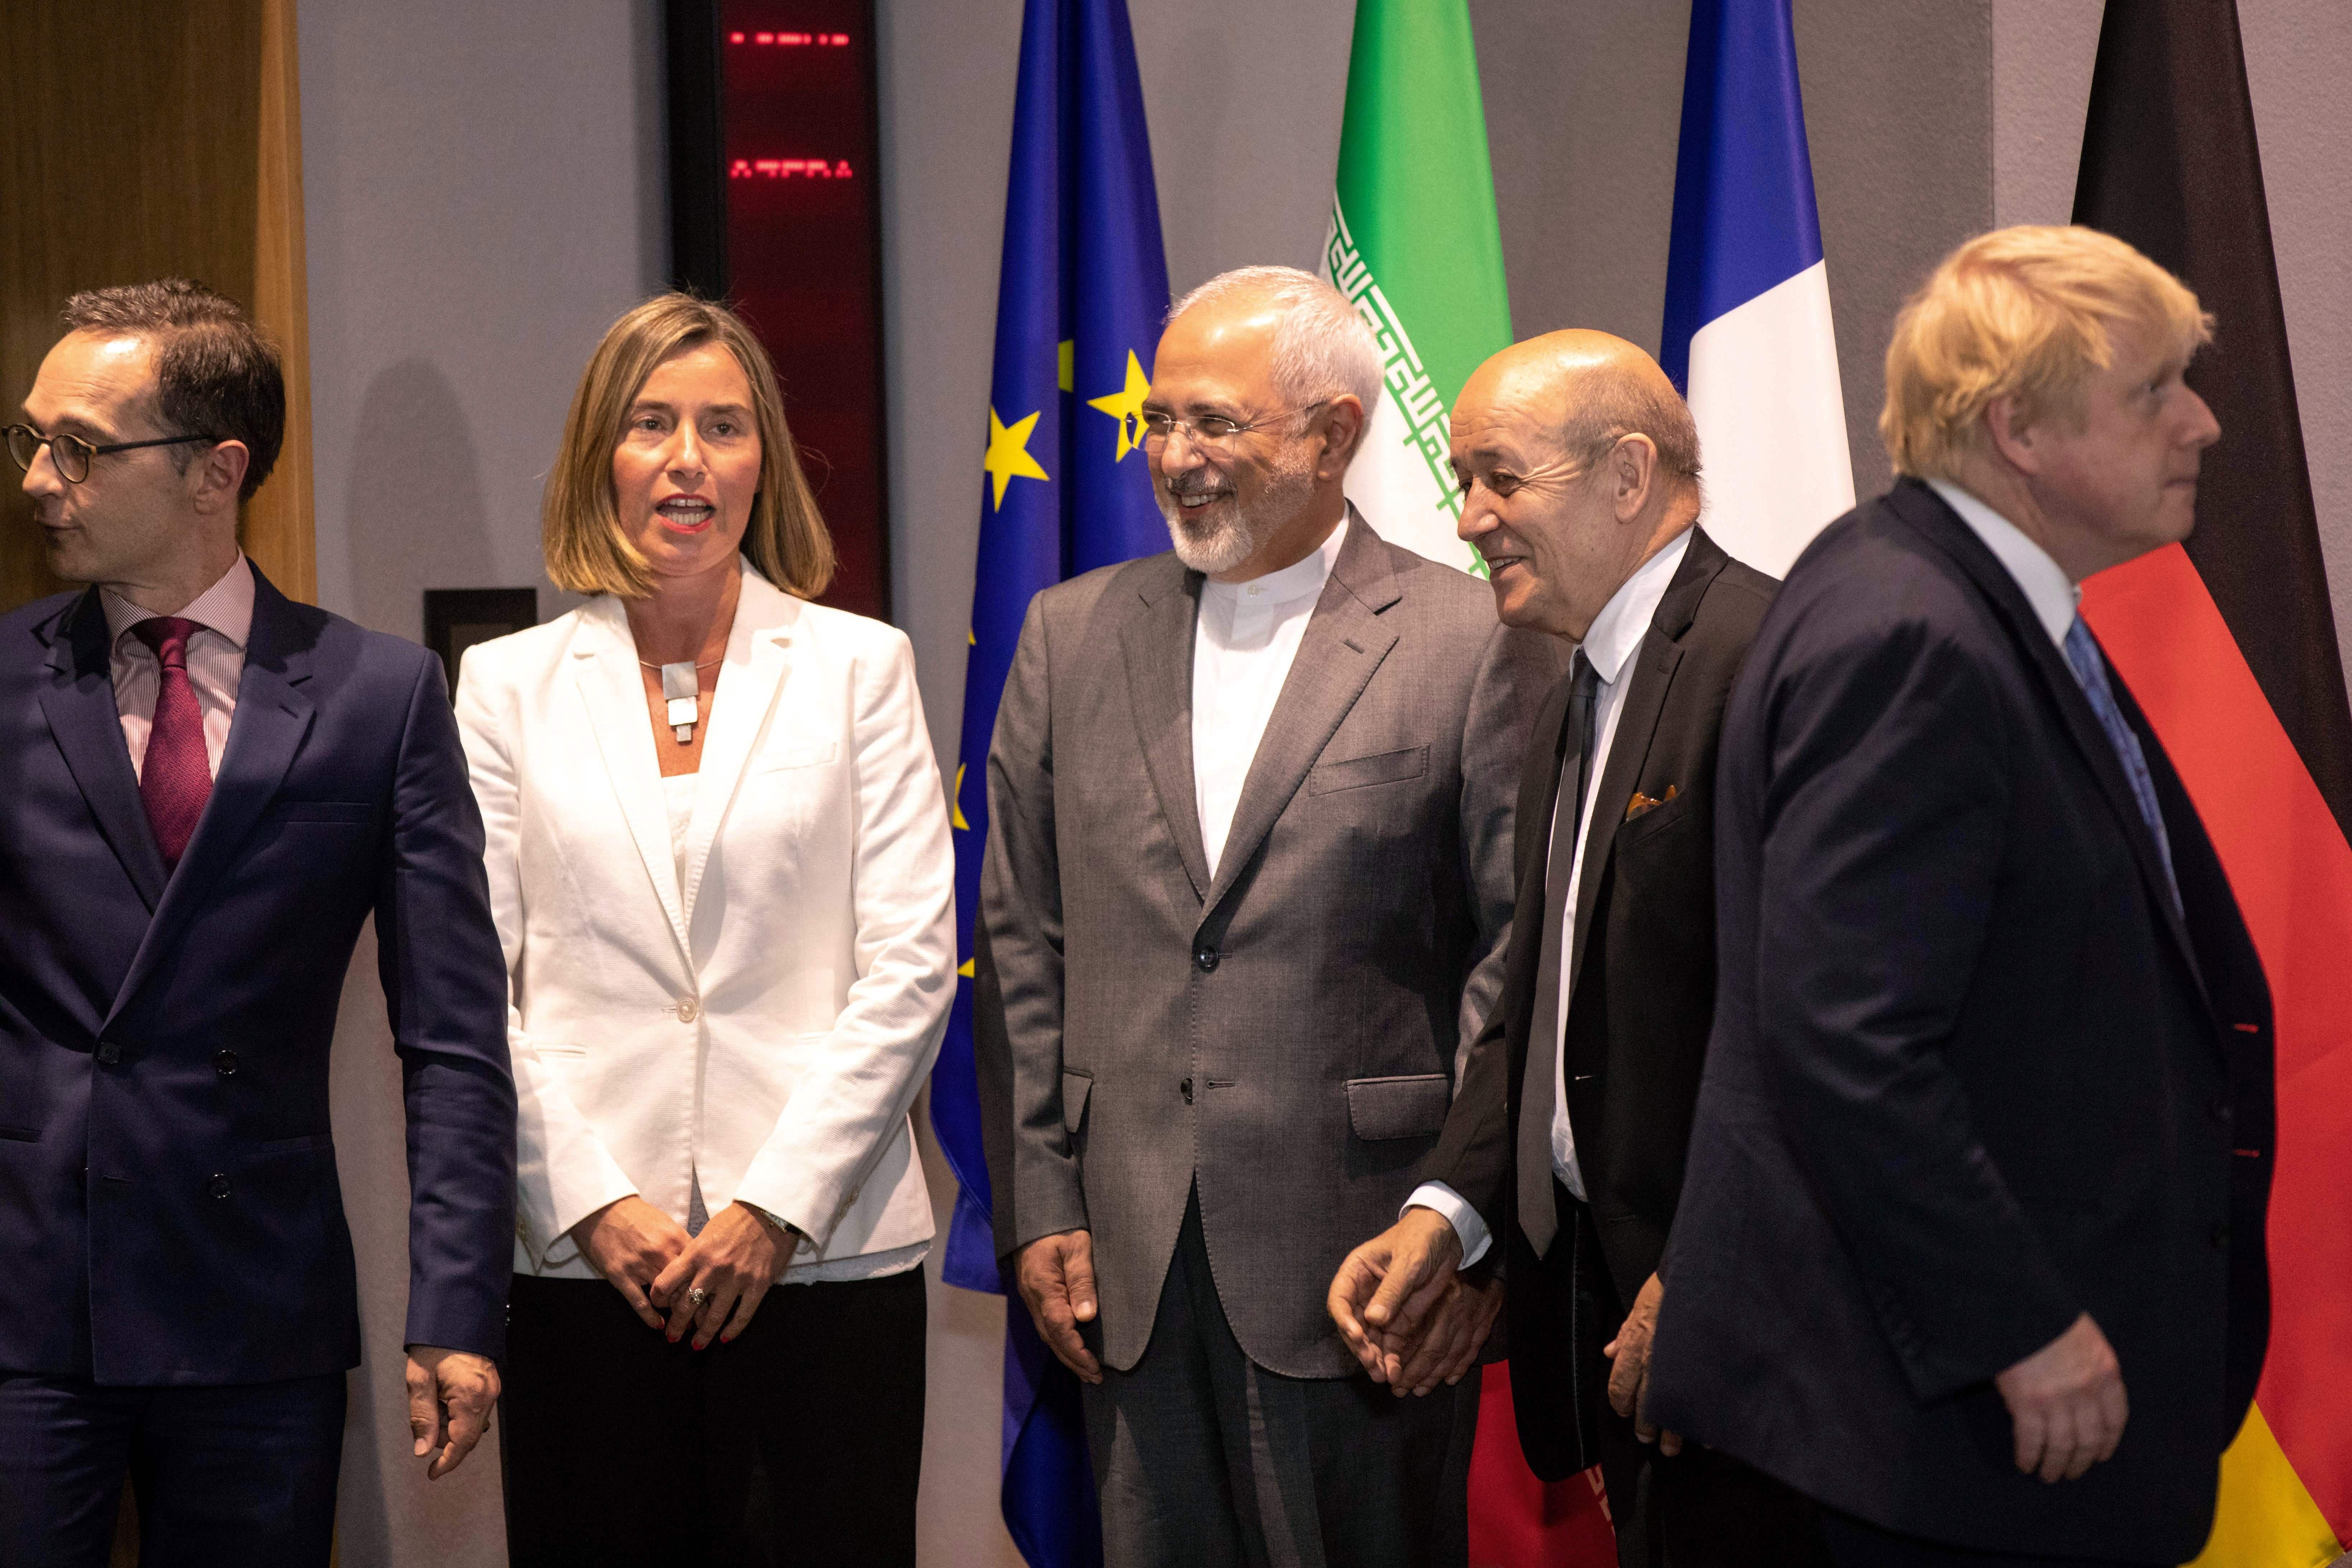 Iran's Foreign Minister Mohammad Javad Zarif (C), Britain's Foreign Secretary Boris Johnson (R), France's Foreign Minister Jean-Yves Le Drian (2nd R), Germany Foreign Minister Heiko Maas (L) -- the ministers of the three European signatories to the 2015 nuclear deal - and EU High Representative for Foreign Affairs Federica Mogherini (2nd L) pose before a meeting of EU/E3 with Iran at the EU headquarters in Brussels on May 15, 2018. - Iran's foreign minister said on May 15 that efforts to save the nuclear deal after the abrupt US withdrawal were 'on the right track' as he began talks with European powers in Brussels. (Photo by Olivier Matthys / POOL / AFP)        (Photo credit should read OLIVIER MATTHYS/AFP/Getty Images)